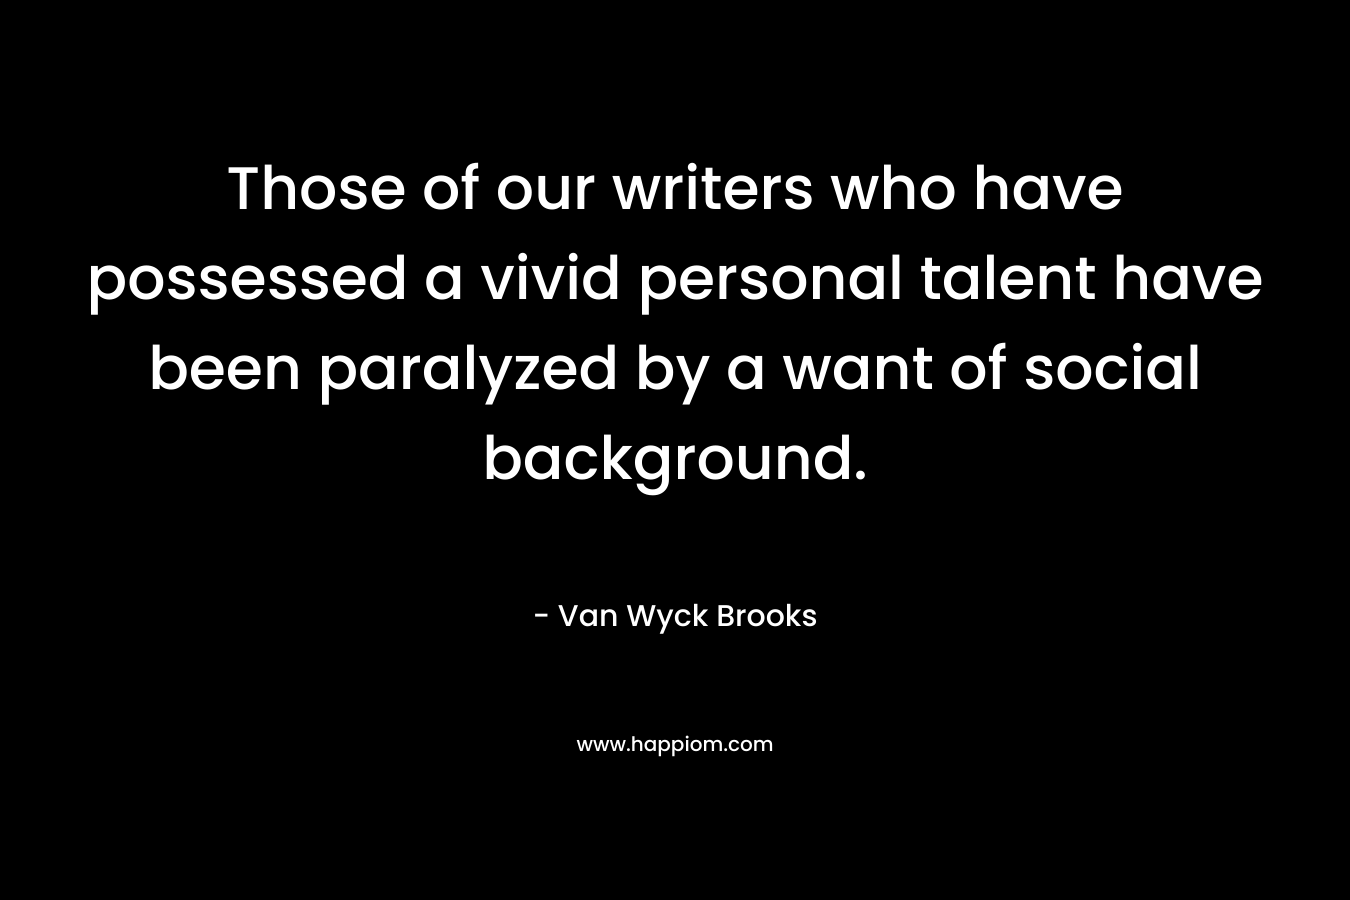 Those of our writers who have possessed a vivid personal talent have been paralyzed by a want of social background. – Van Wyck Brooks